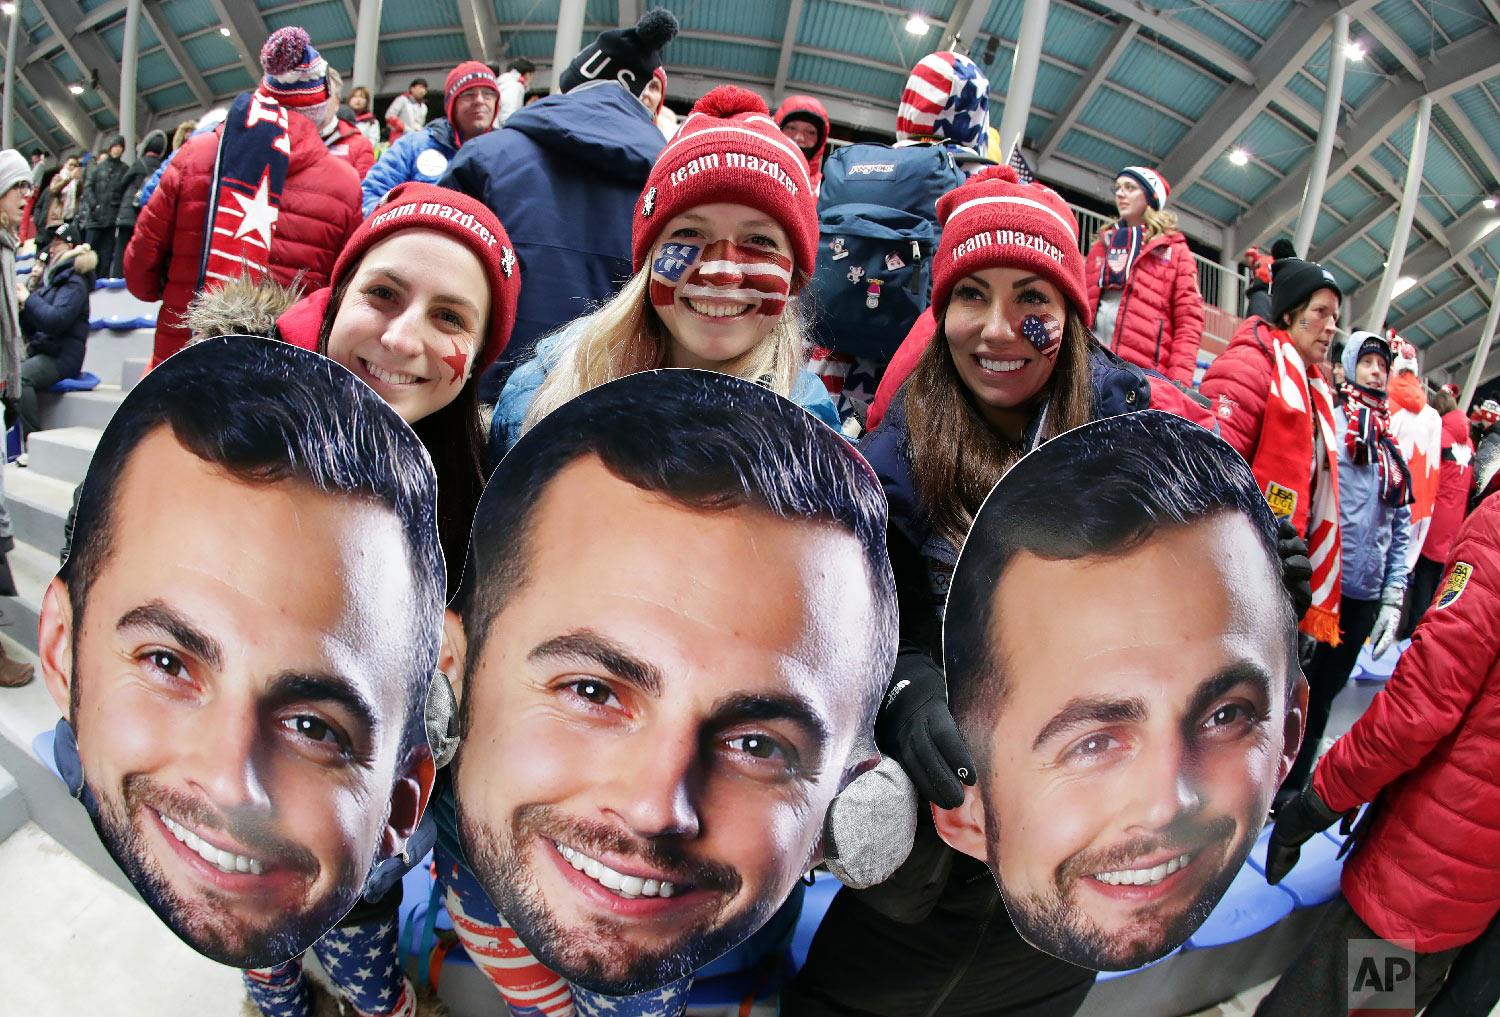  Supporters of luger Chris Mazdzer, of the United States, wait for the first run to start at the 2018 Winter Olympics in Pyeongchang, South Korea, Saturday, Feb. 10, 2018. (AP Photo/Michael Sohn) 